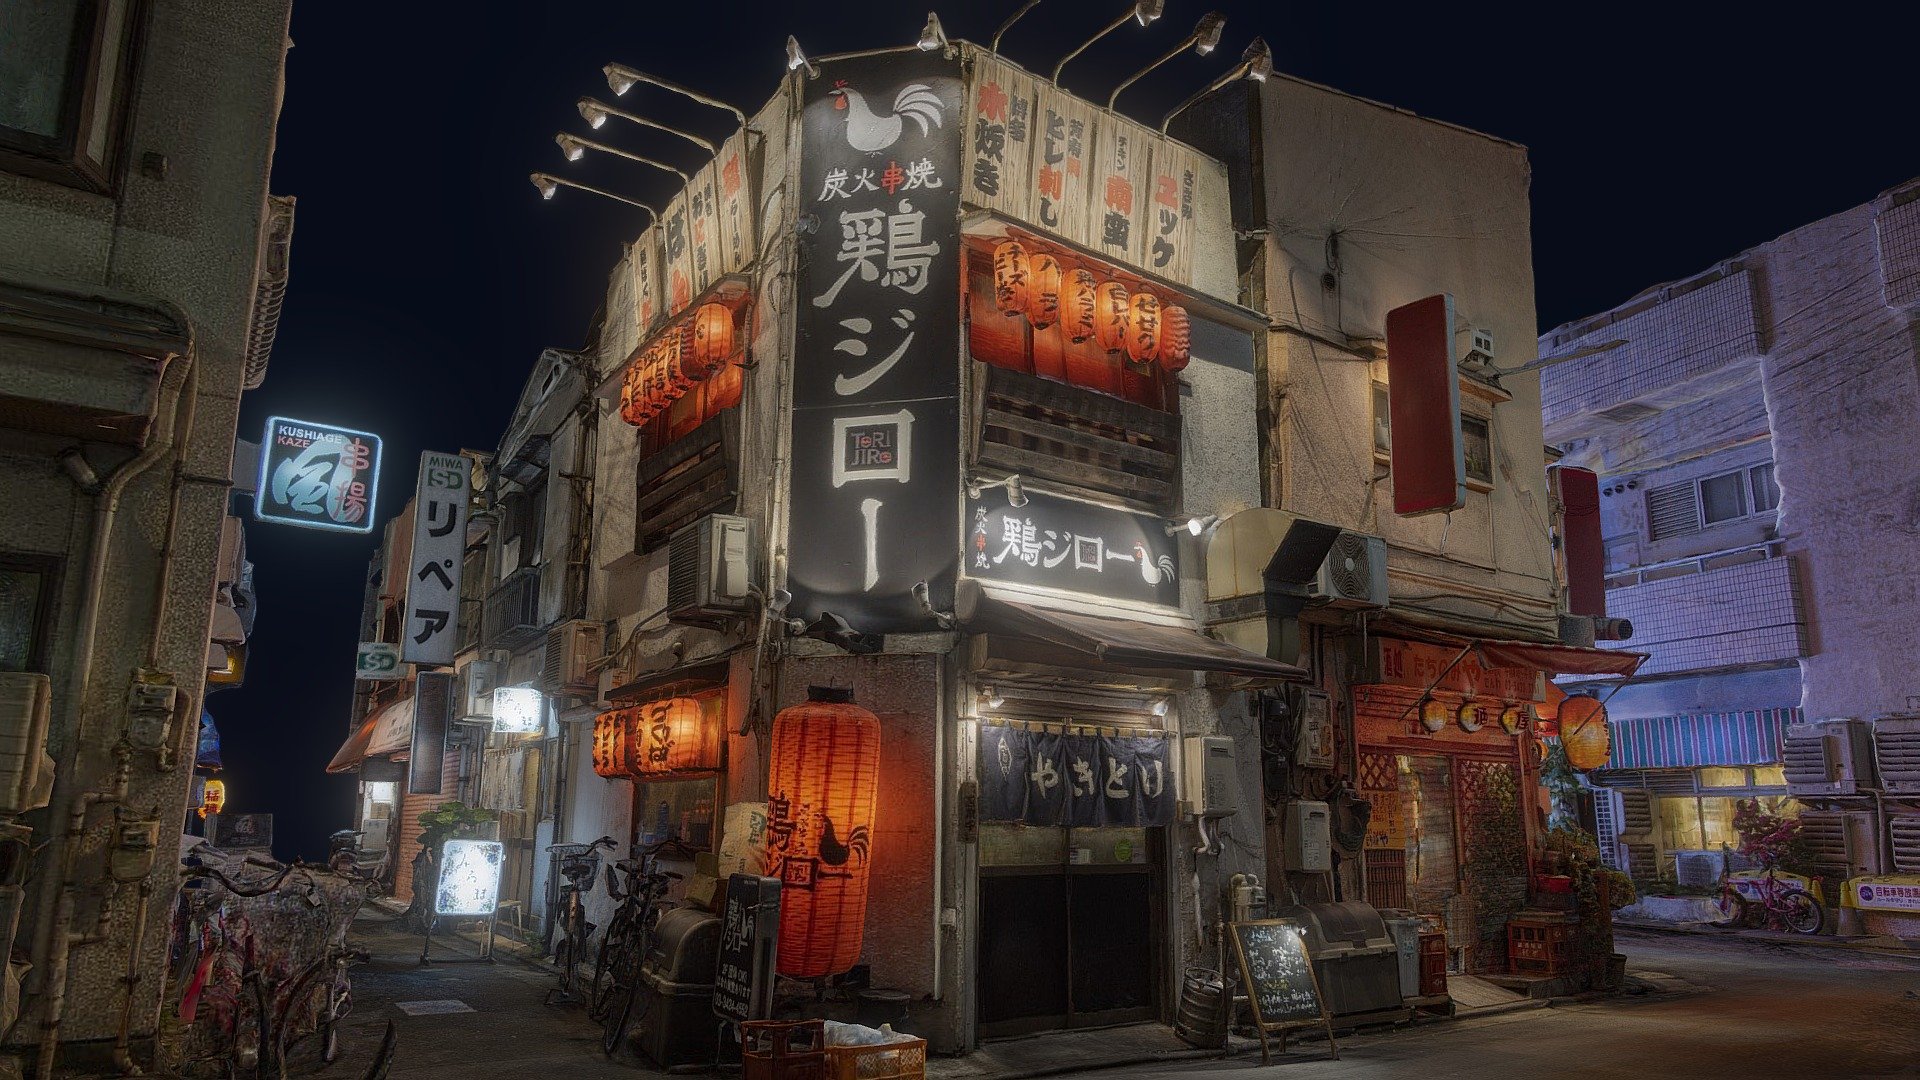 It is one of the most famous shopping districts in Setagaya Ward, as well as a popular residential area that ranks high in the Kichijoji and Jiyugaoka rankings. It is often referred to as a &ldquo;trendy city